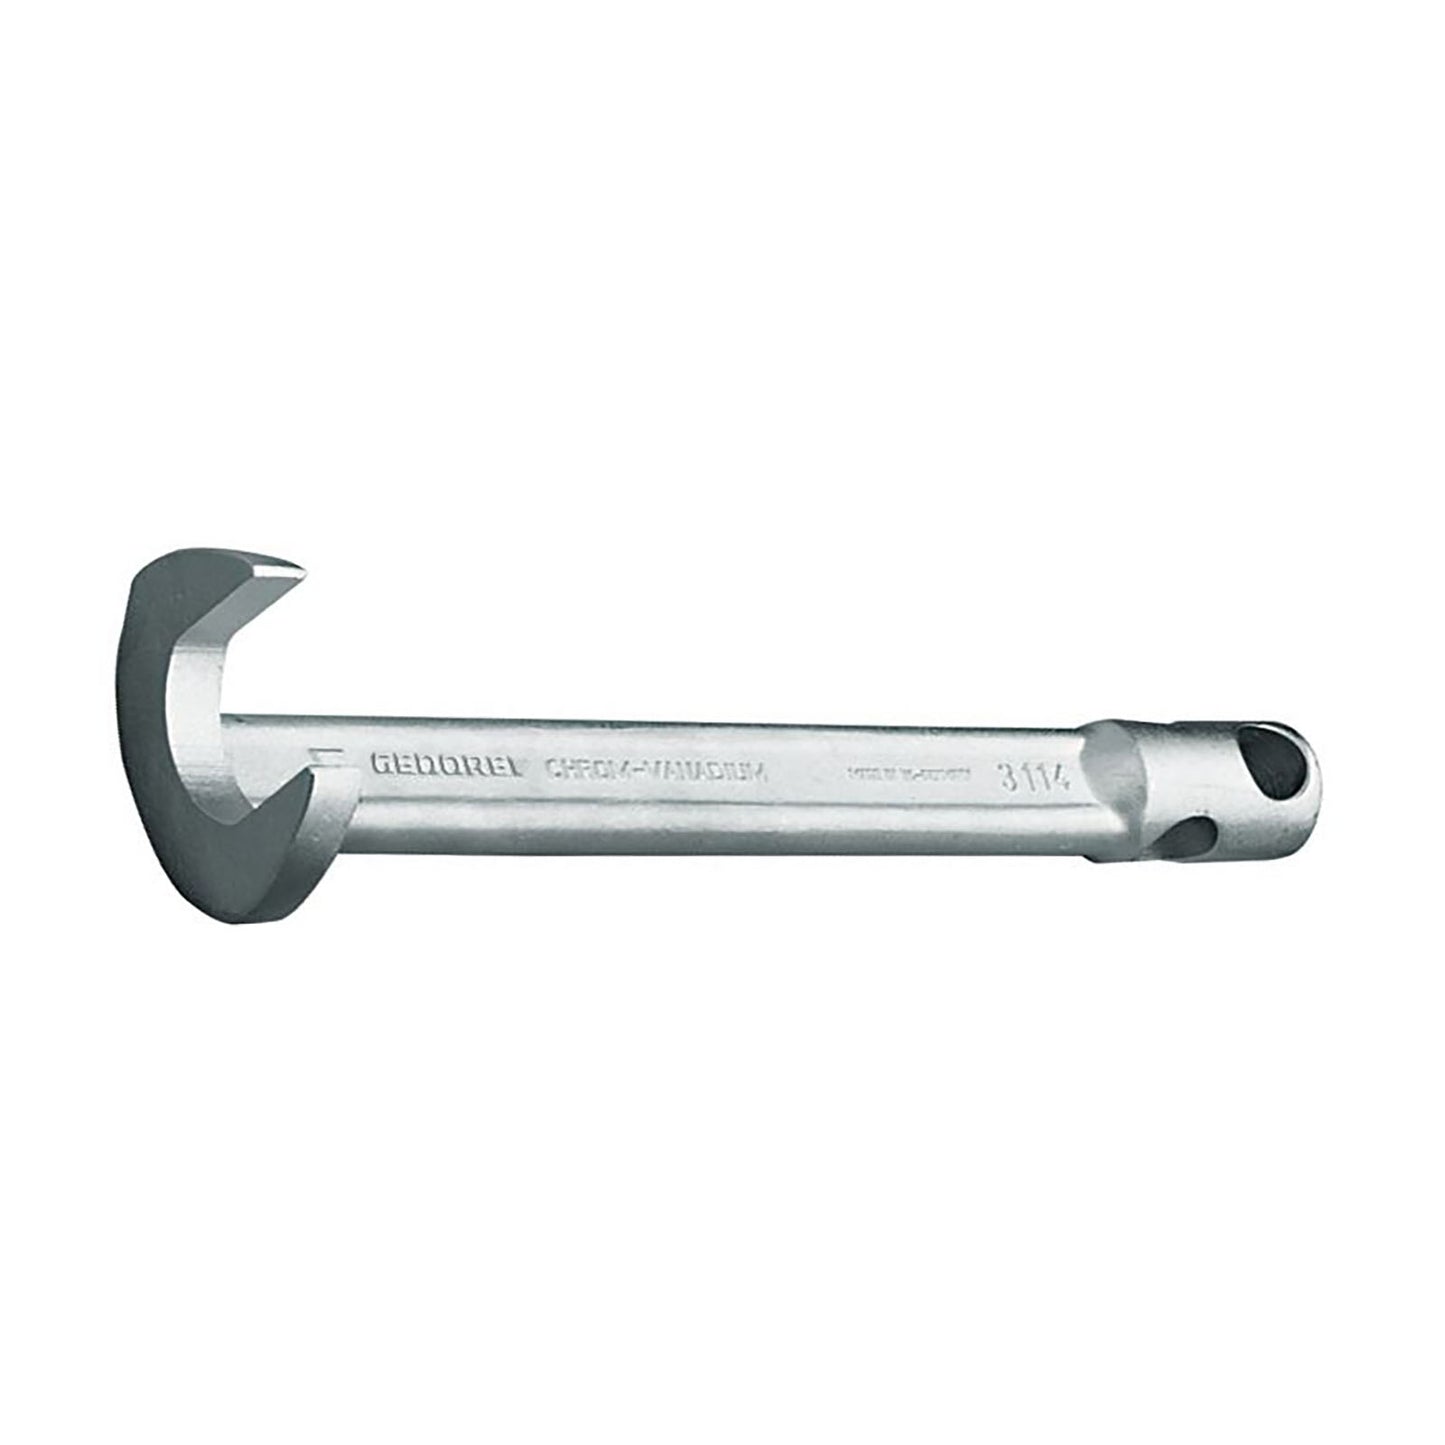 GEDORE 3114 27 - Forked Foot Wrench, 27mm (6670720)